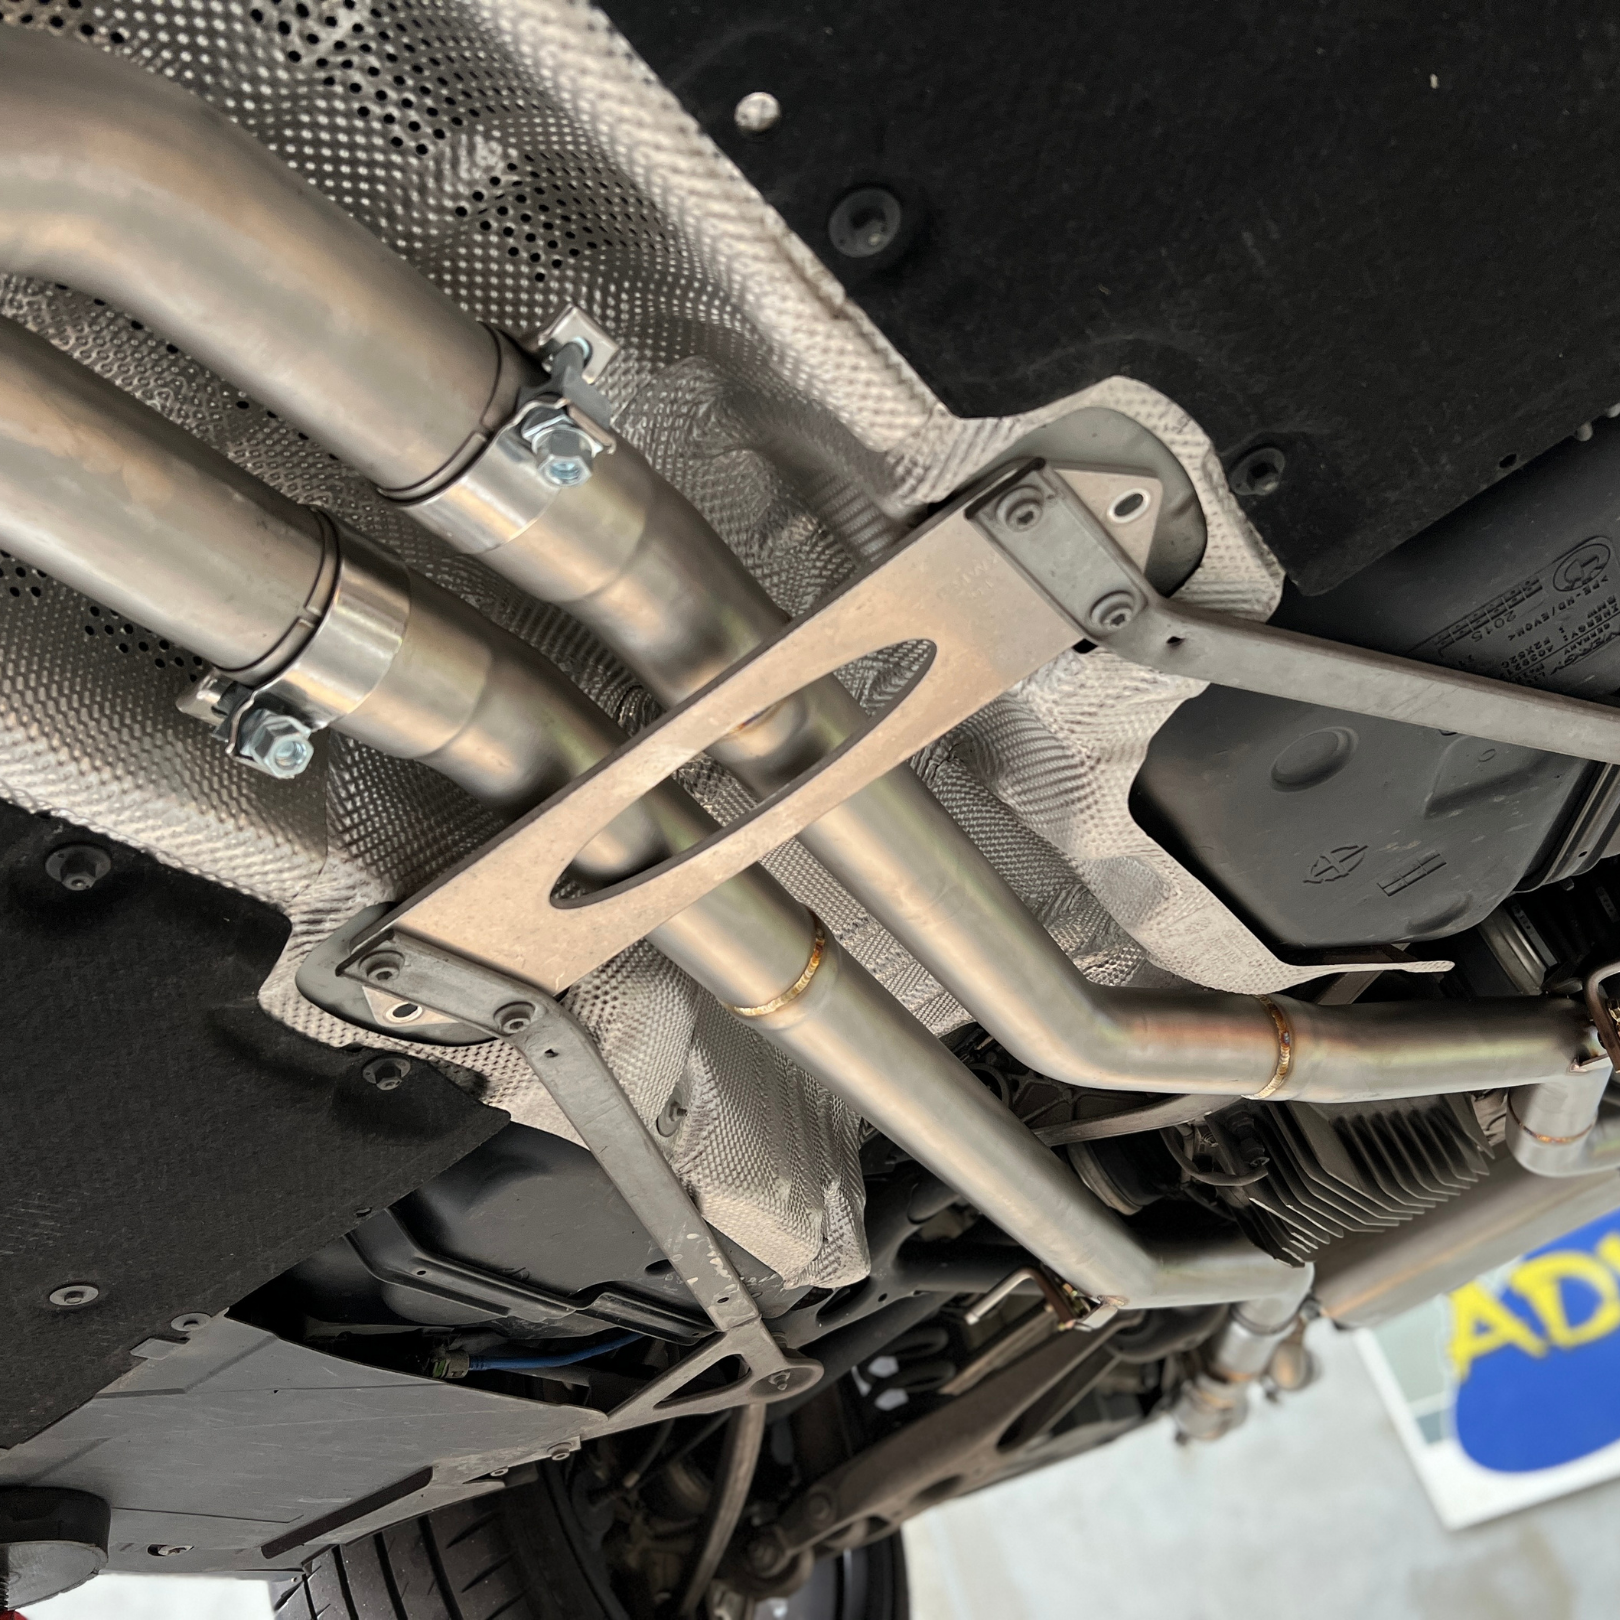 PRS VALVED PERFORMANCE EXHAUST SYSTEM - BMW F87 M2 & M2 COMPETITION